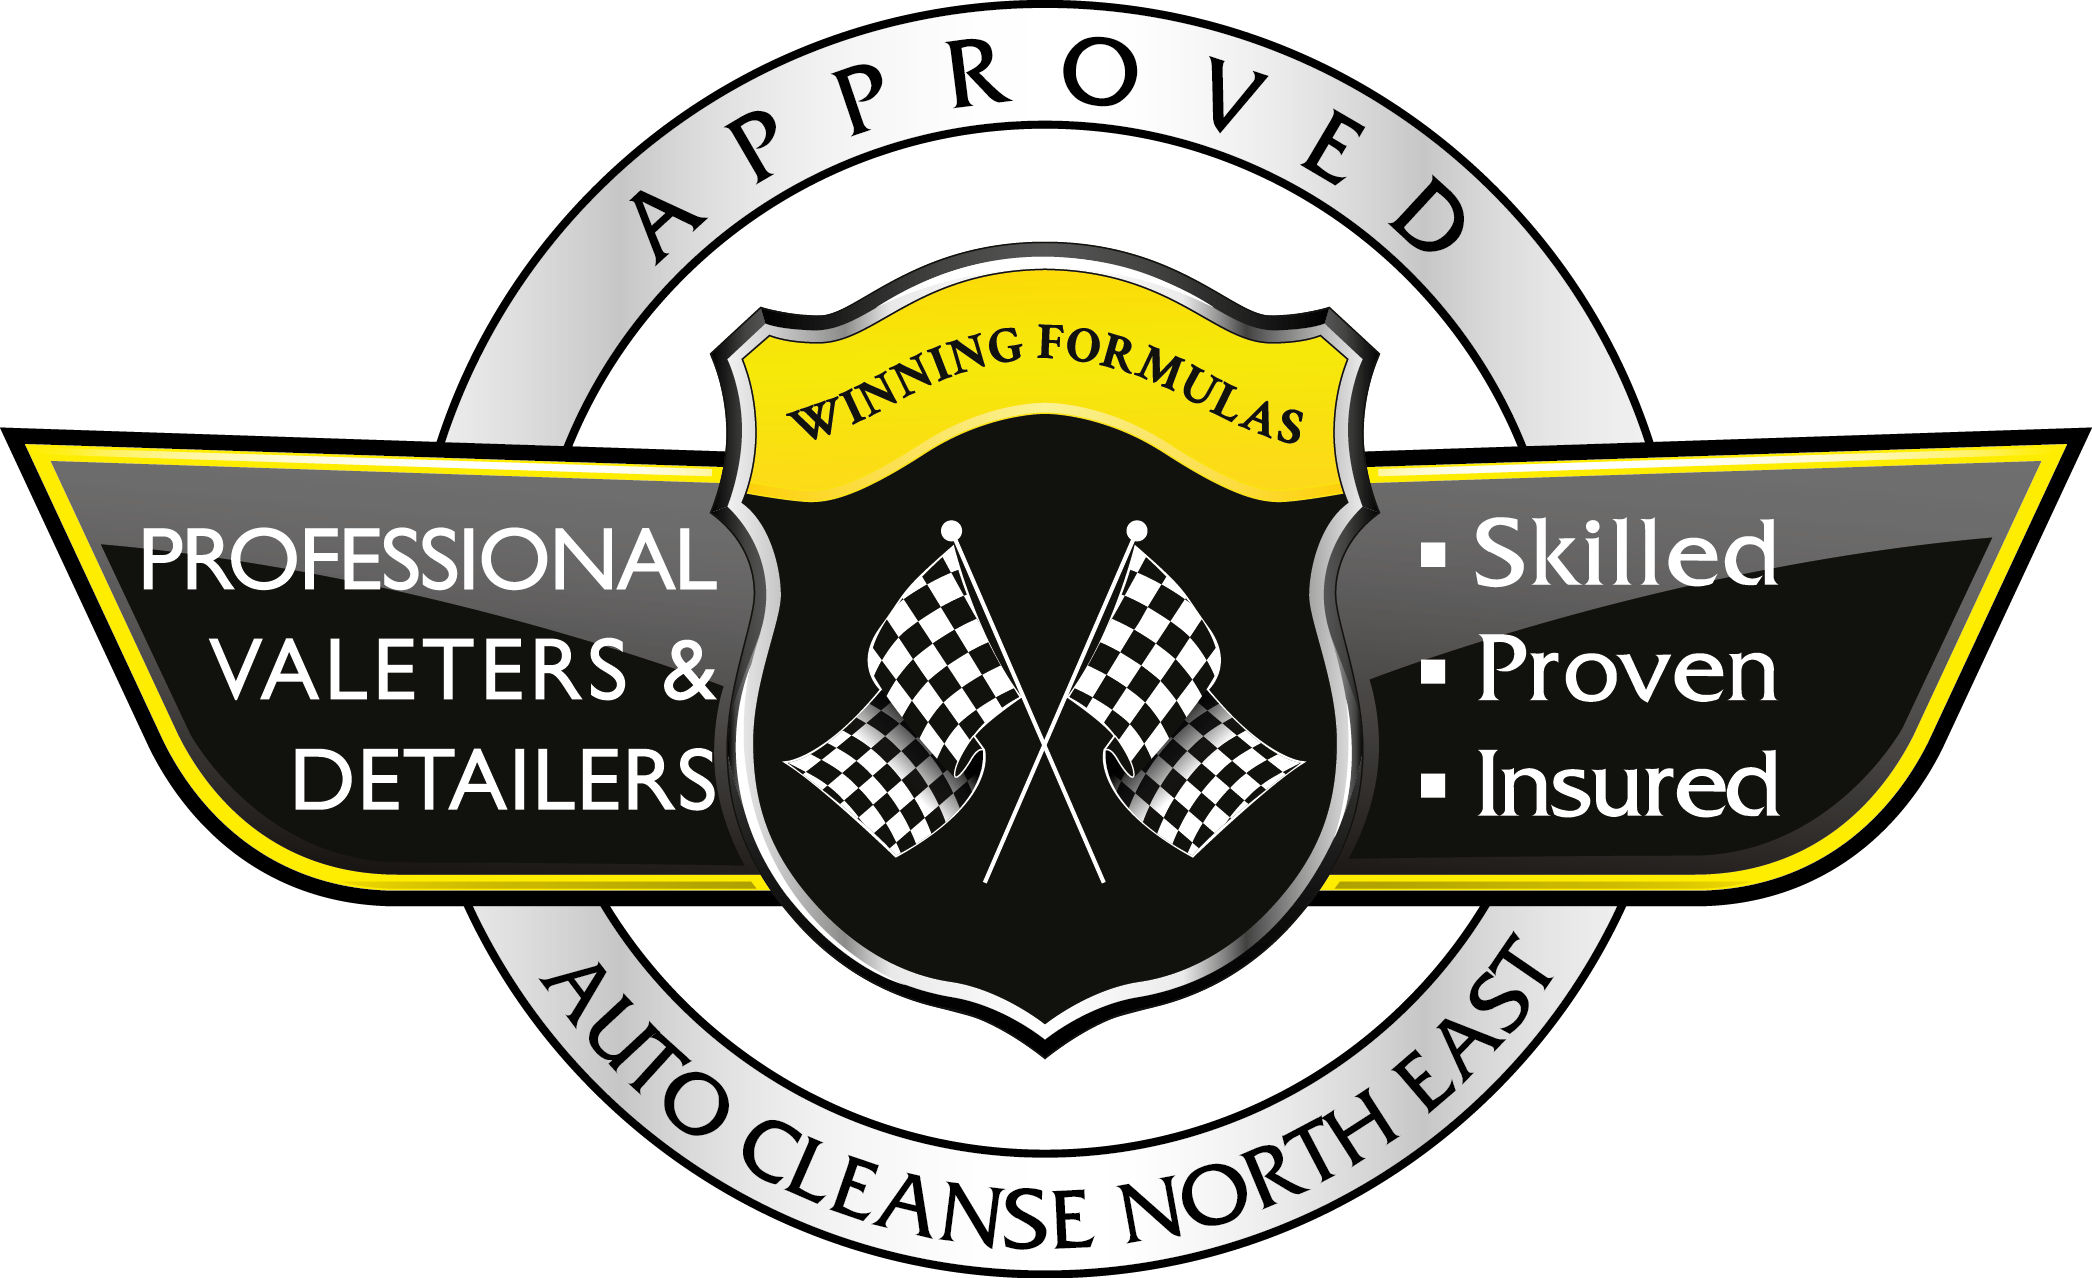 Approved Member of the winning directory of valeters and detailers.